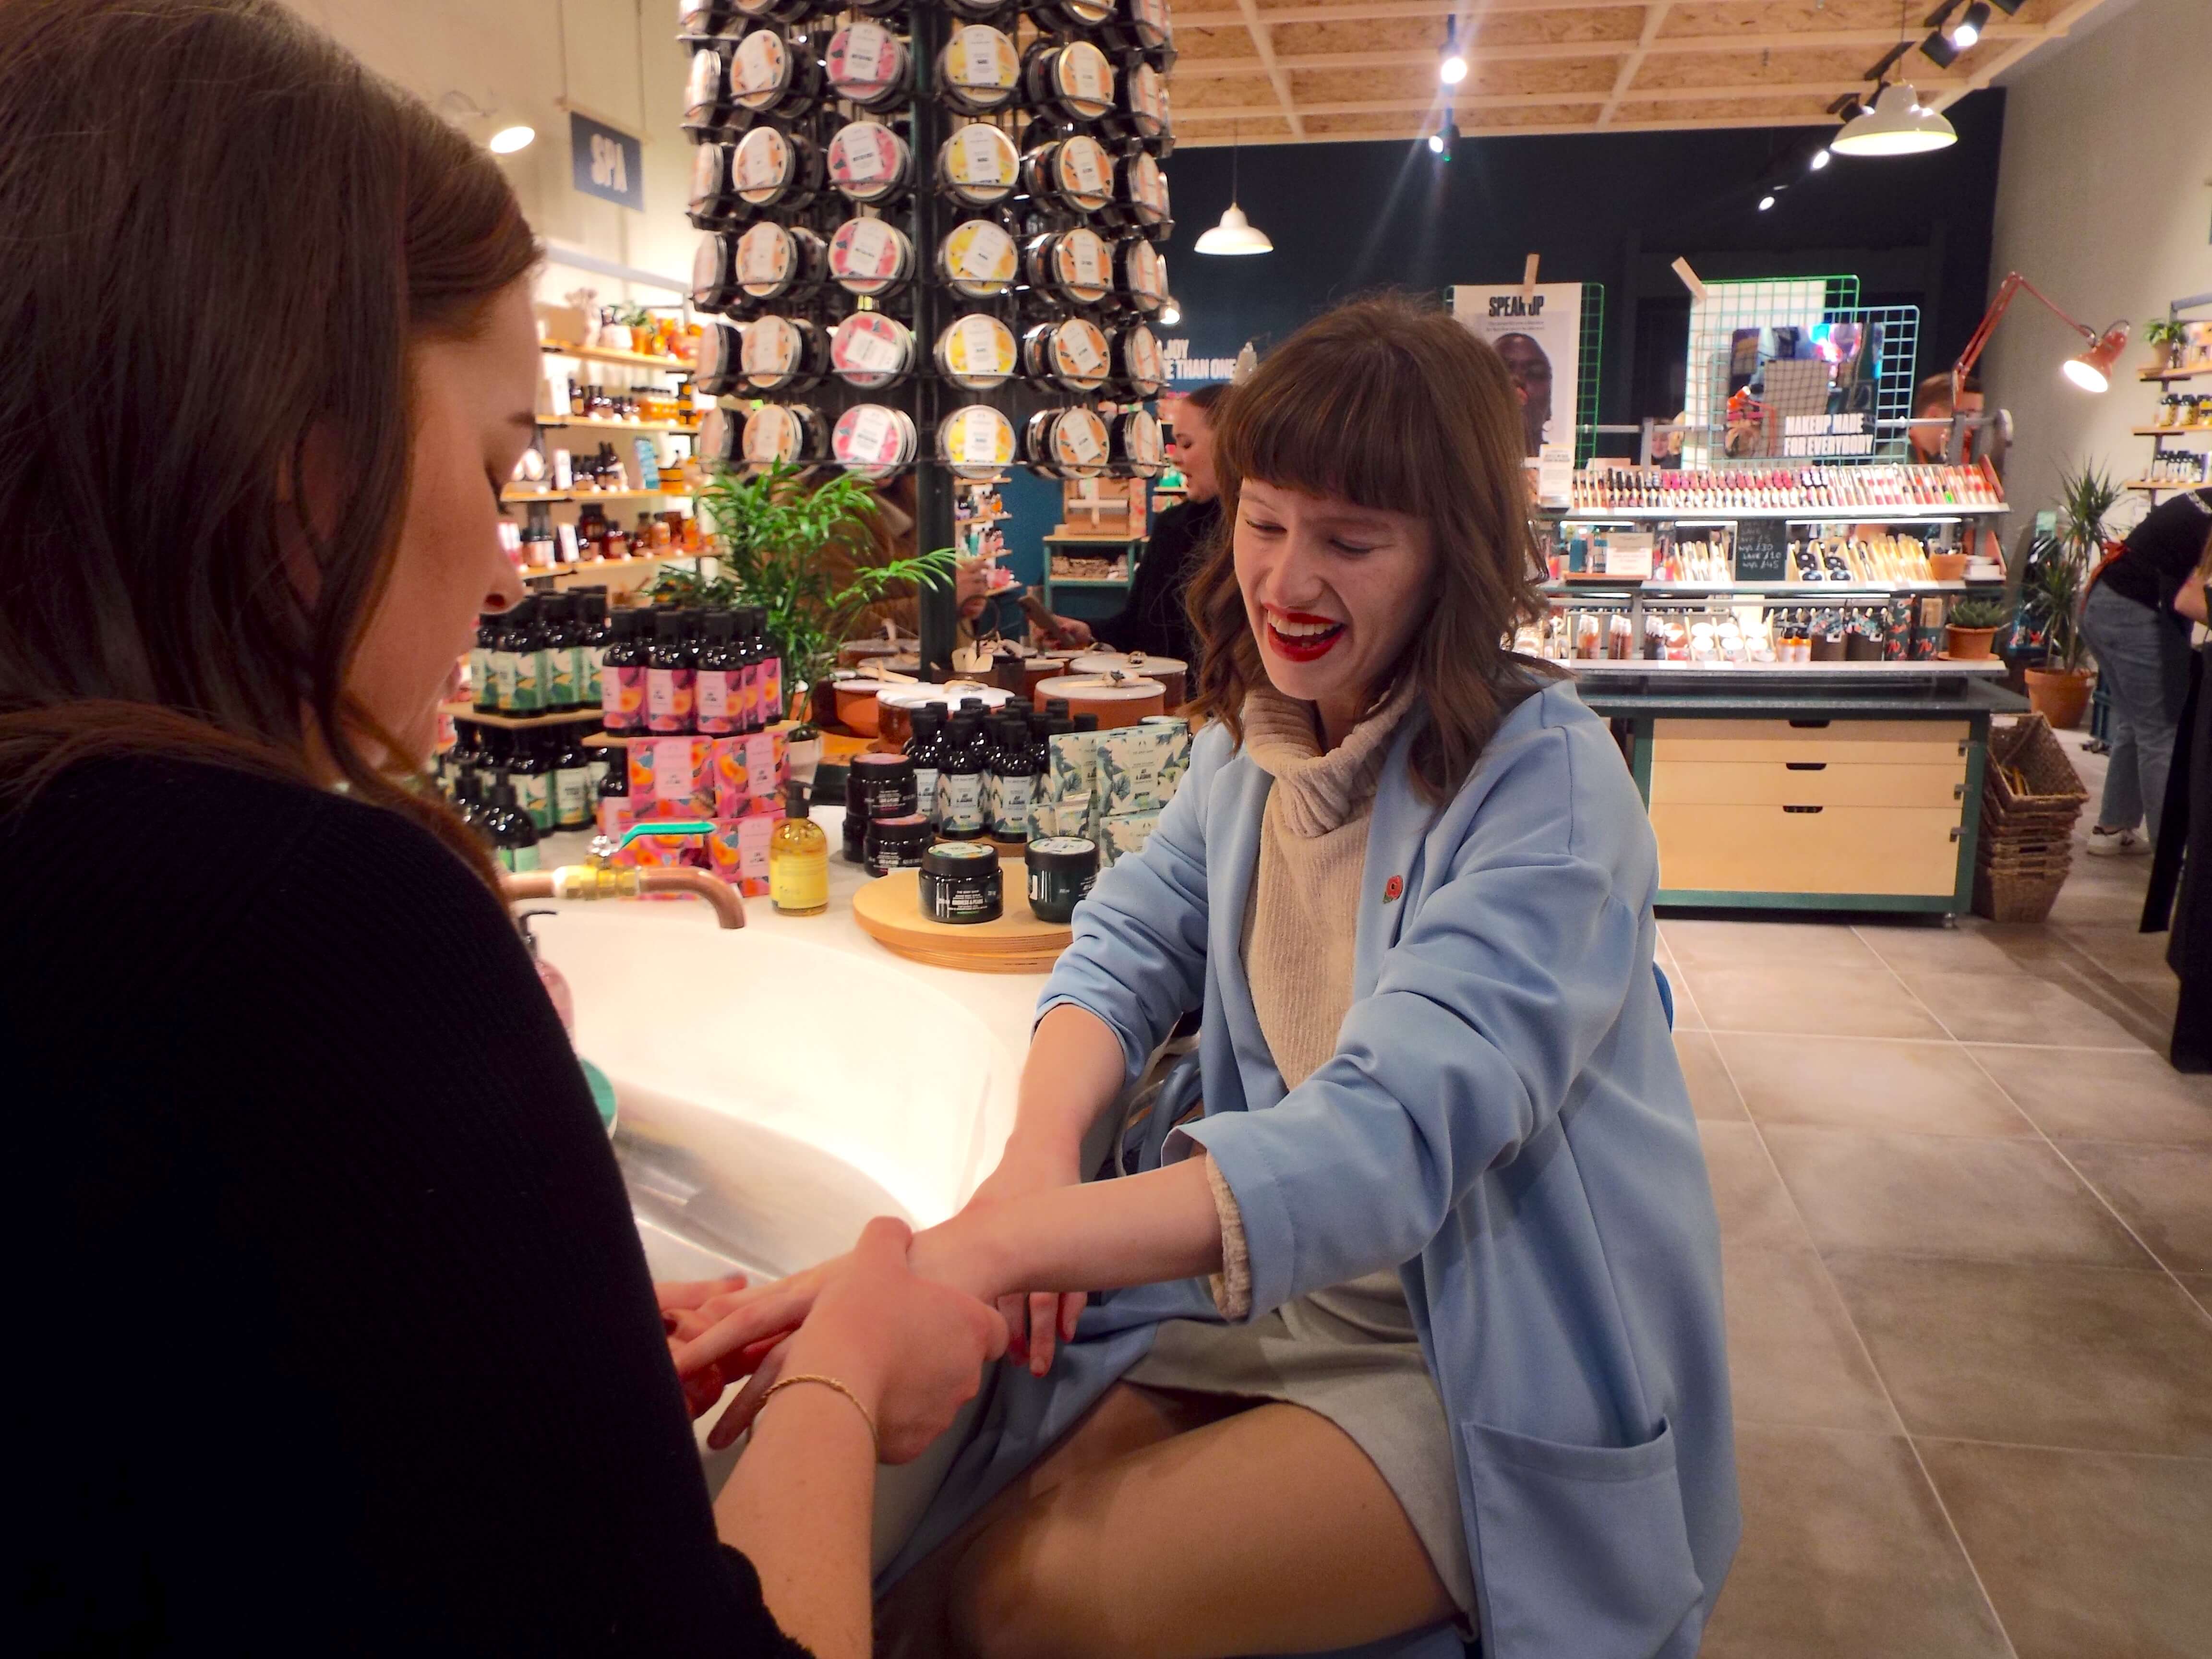 Ellie sat at the product testing island, getting a hand massage and pamper, smiling and talking with Lauren, the beauty assistant performing the hand massage.